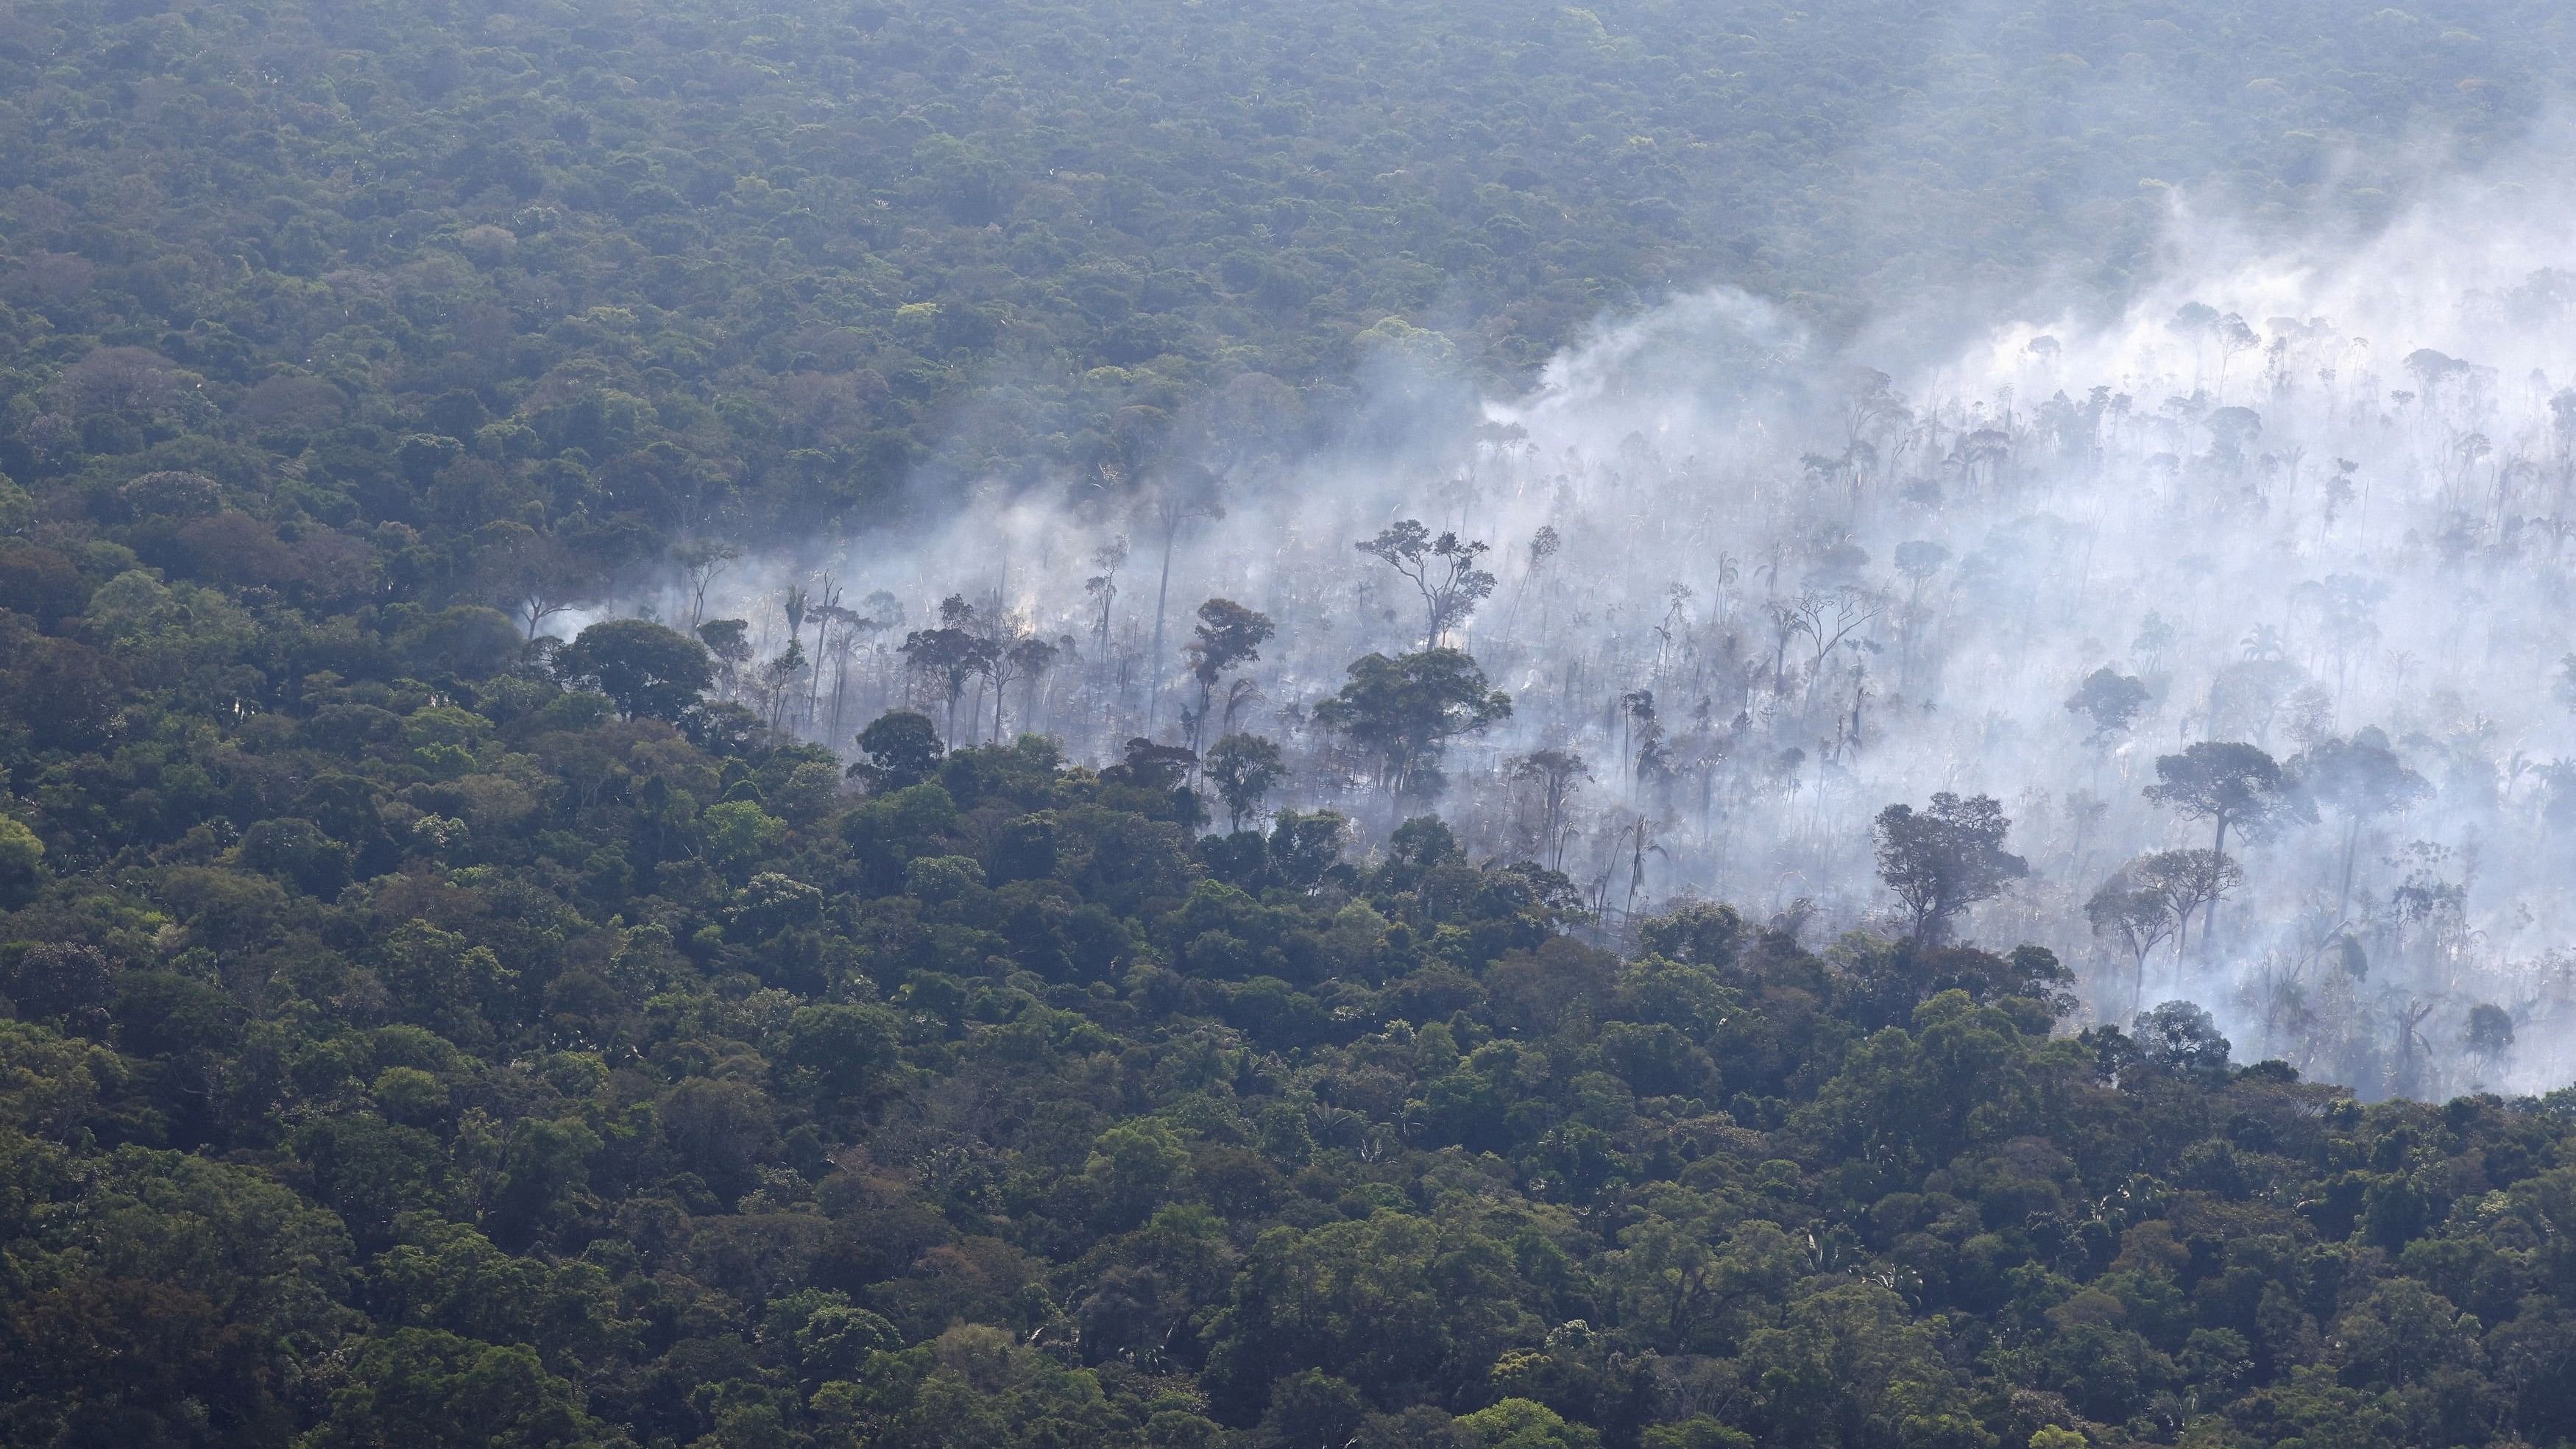 Scientists predict looming crisis by analyzing remnants of Amazon wildfires